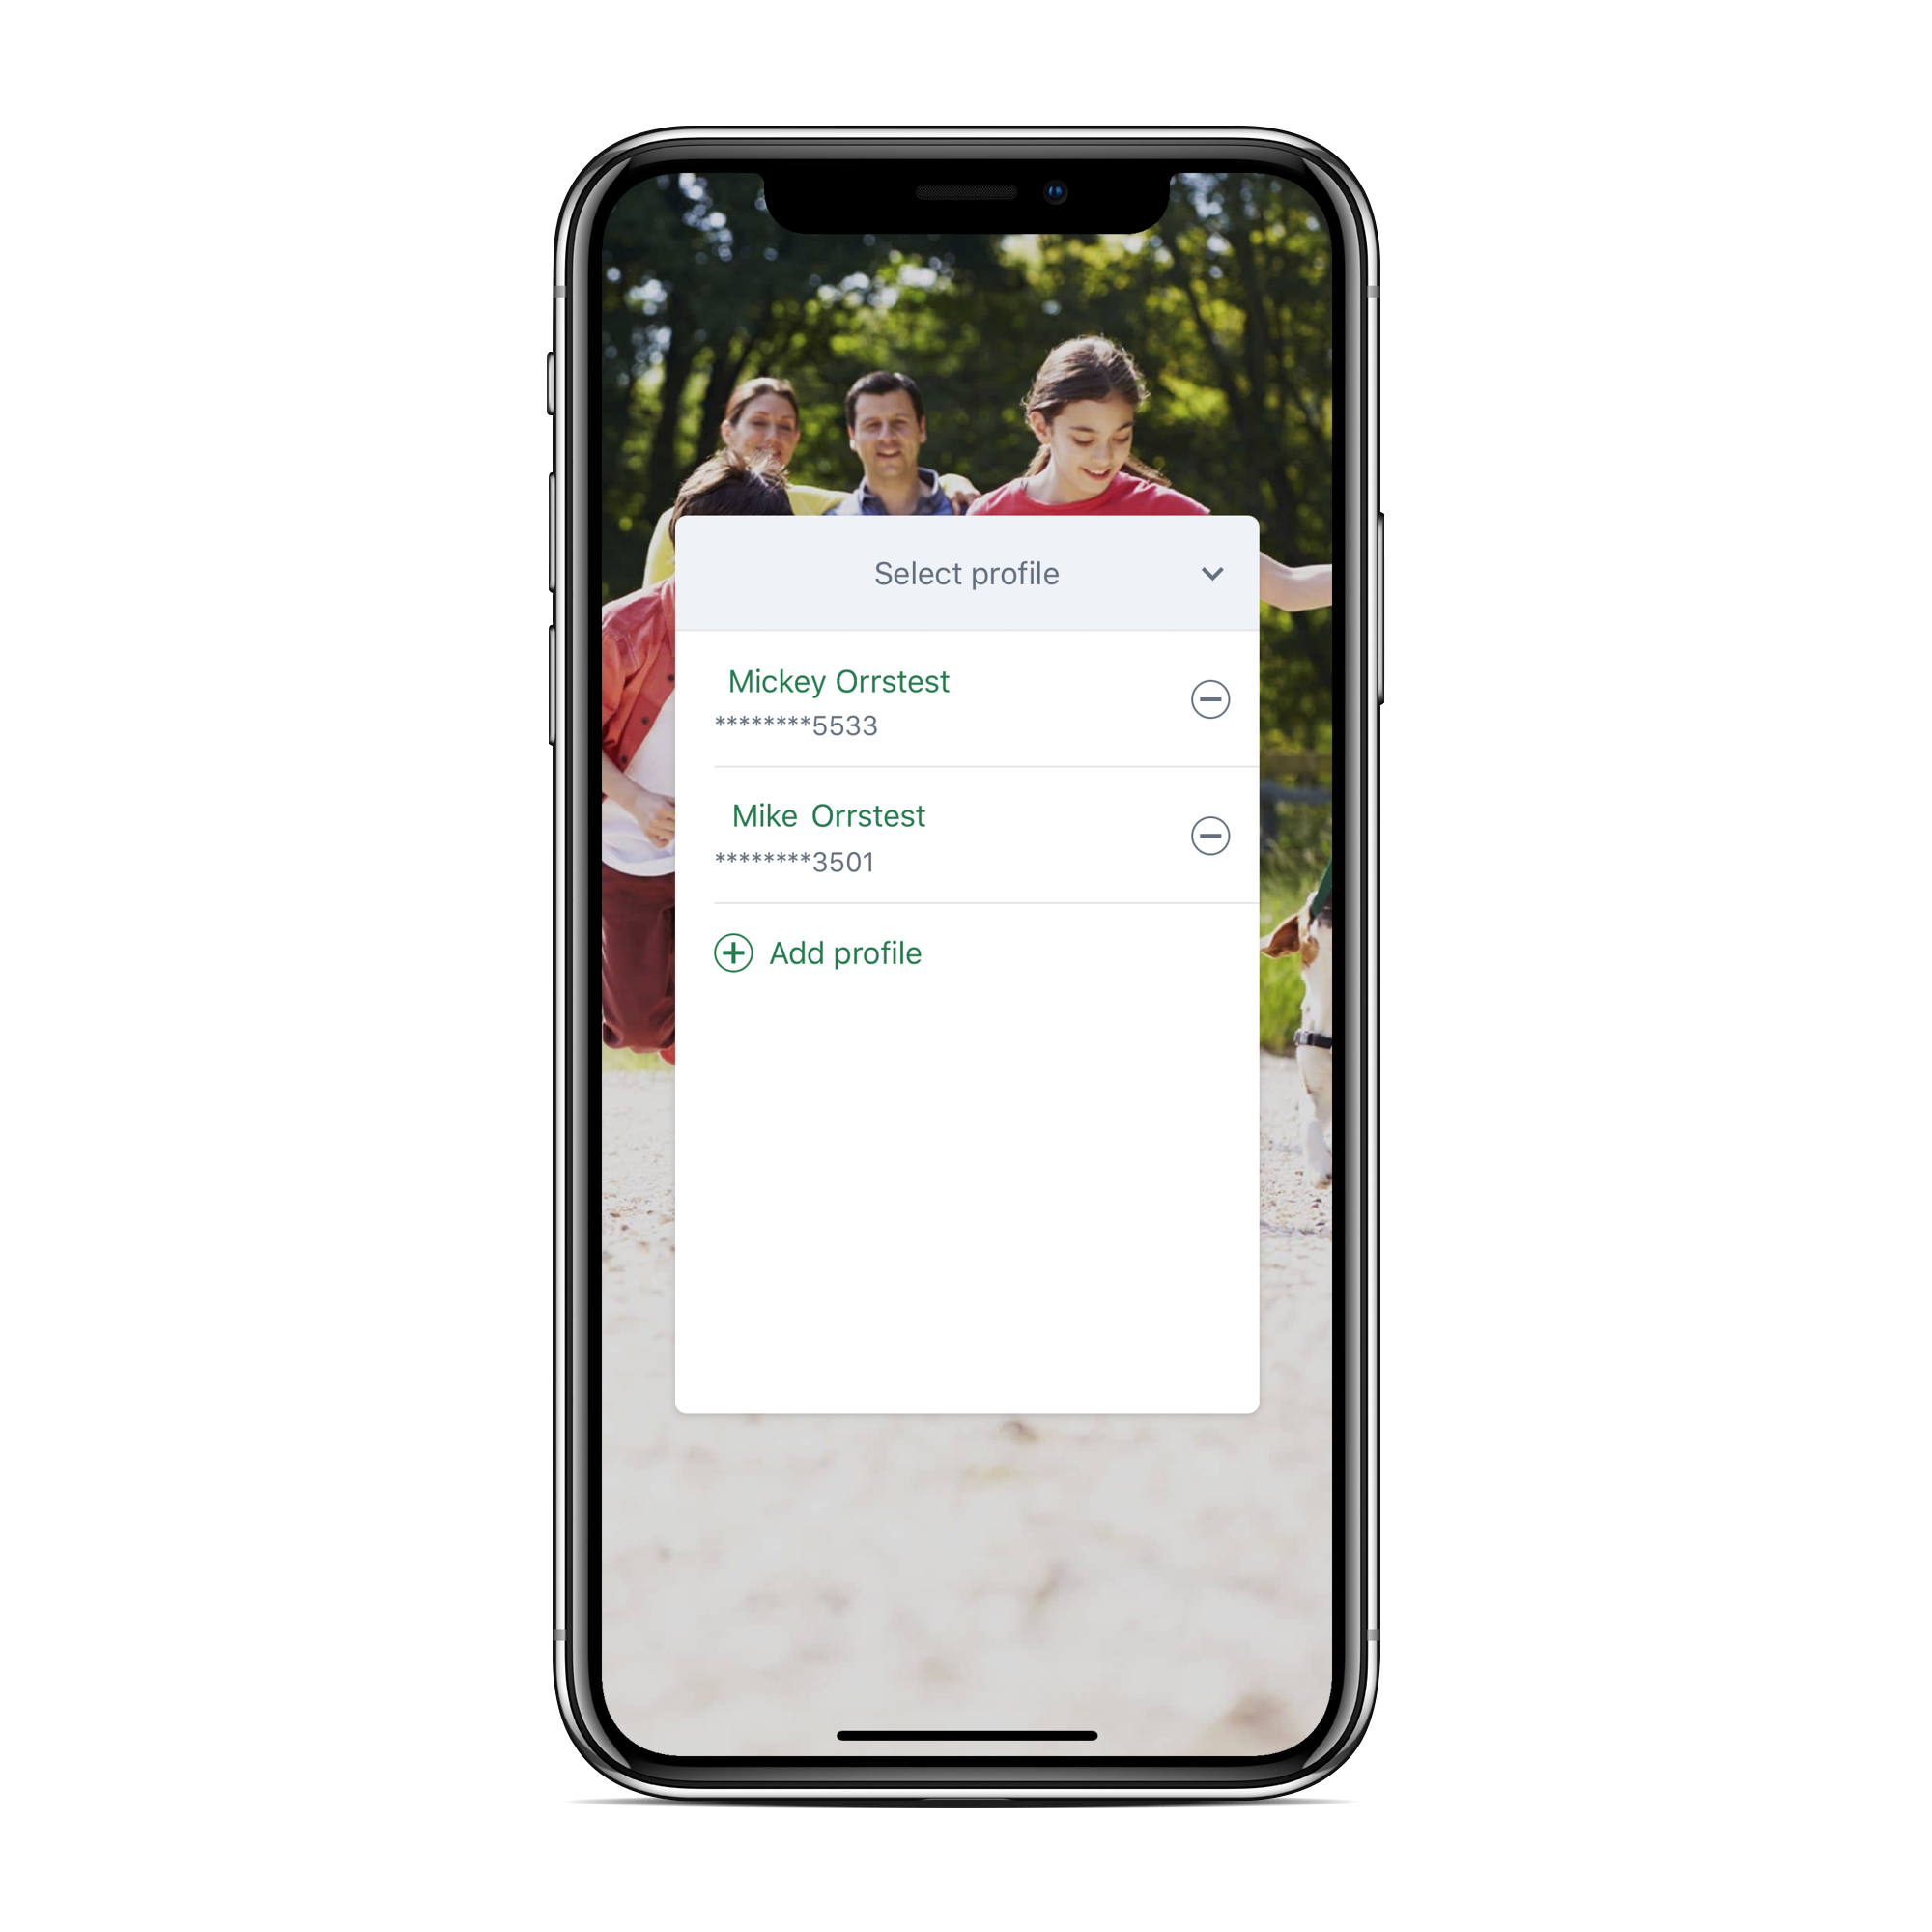 Orrstown Bank mobile banking app switch users screen on space grey iPhone X